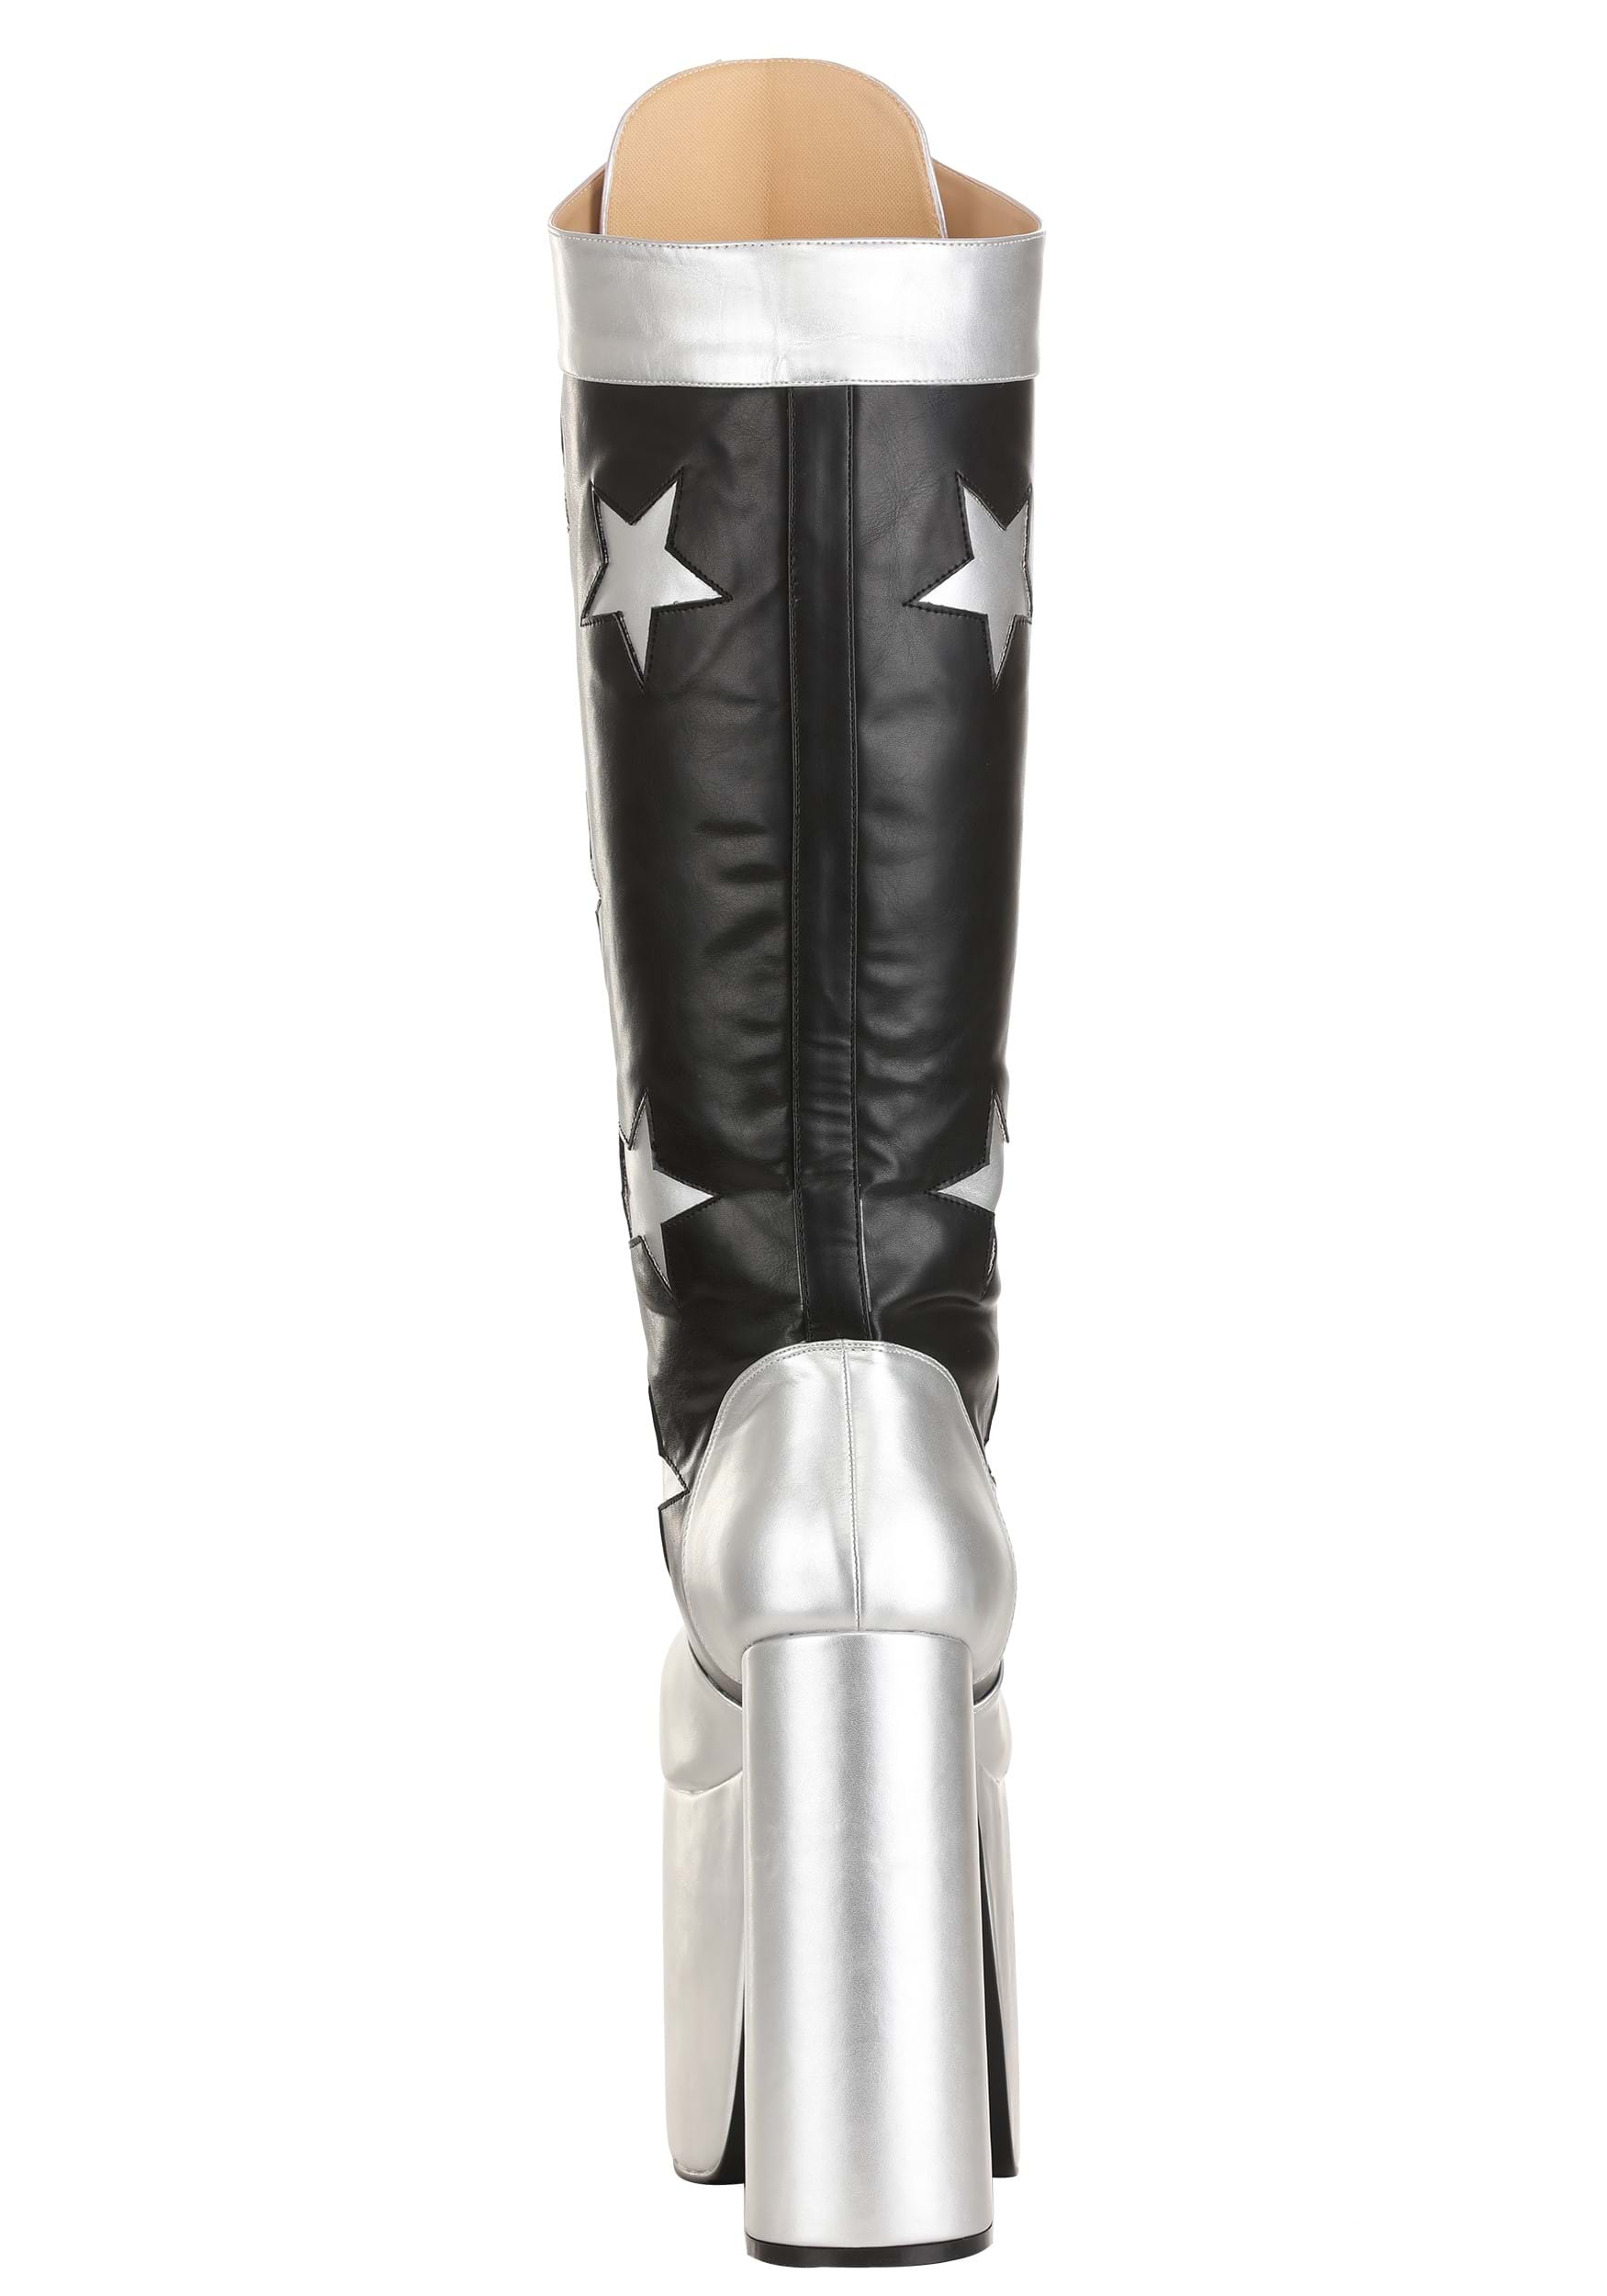 KISS Starchild Boots , Exclusive Fancy Dress Costume Boots